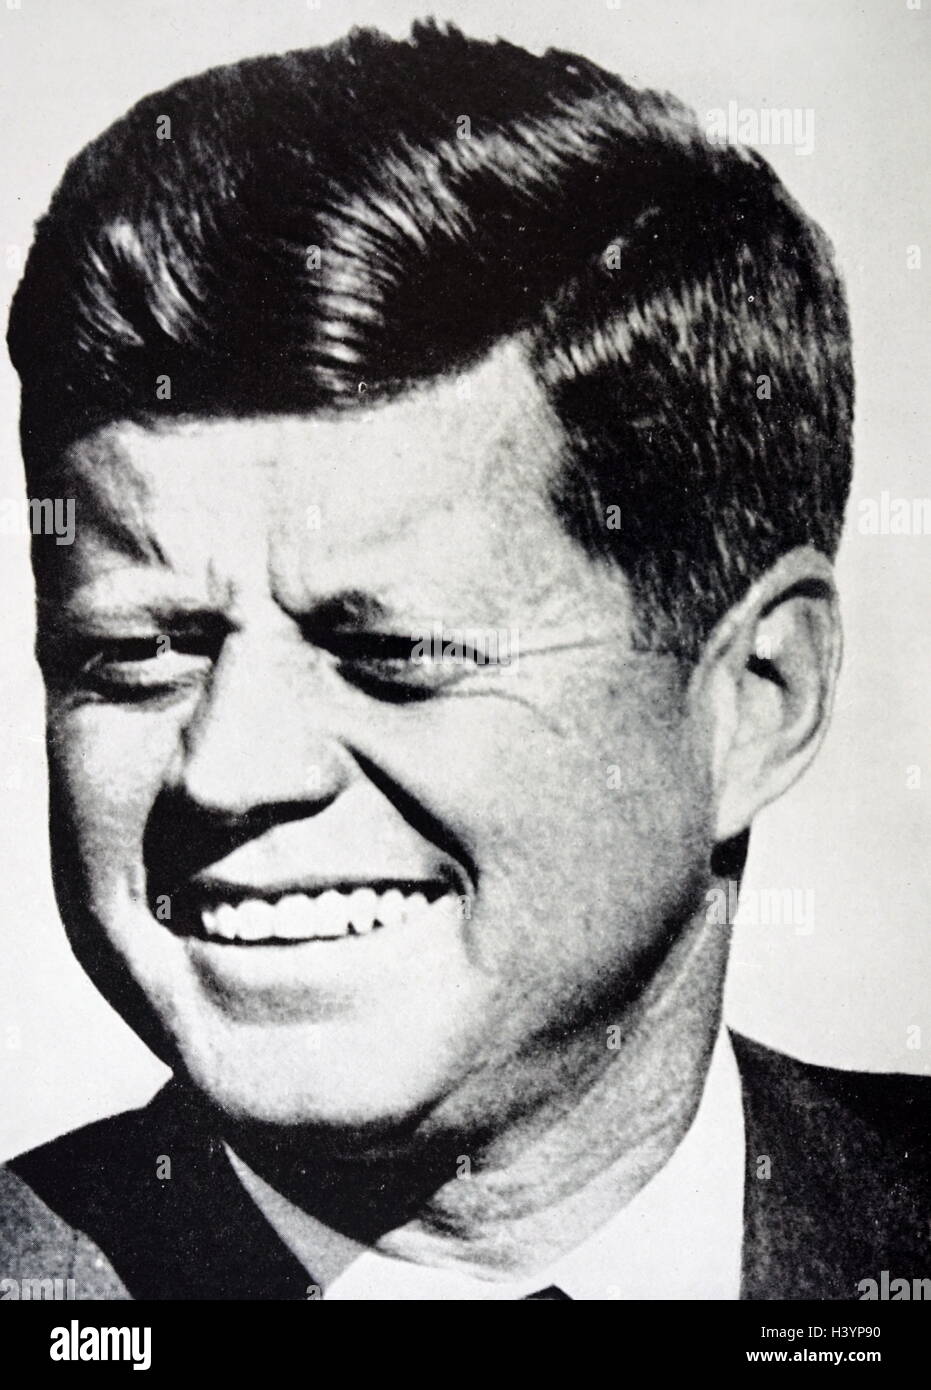 Photograph of former President John F. Kennedy (1917-1963) an American politician and former President of the United States of America until his assassination. Dated 20th Century Stock Photo